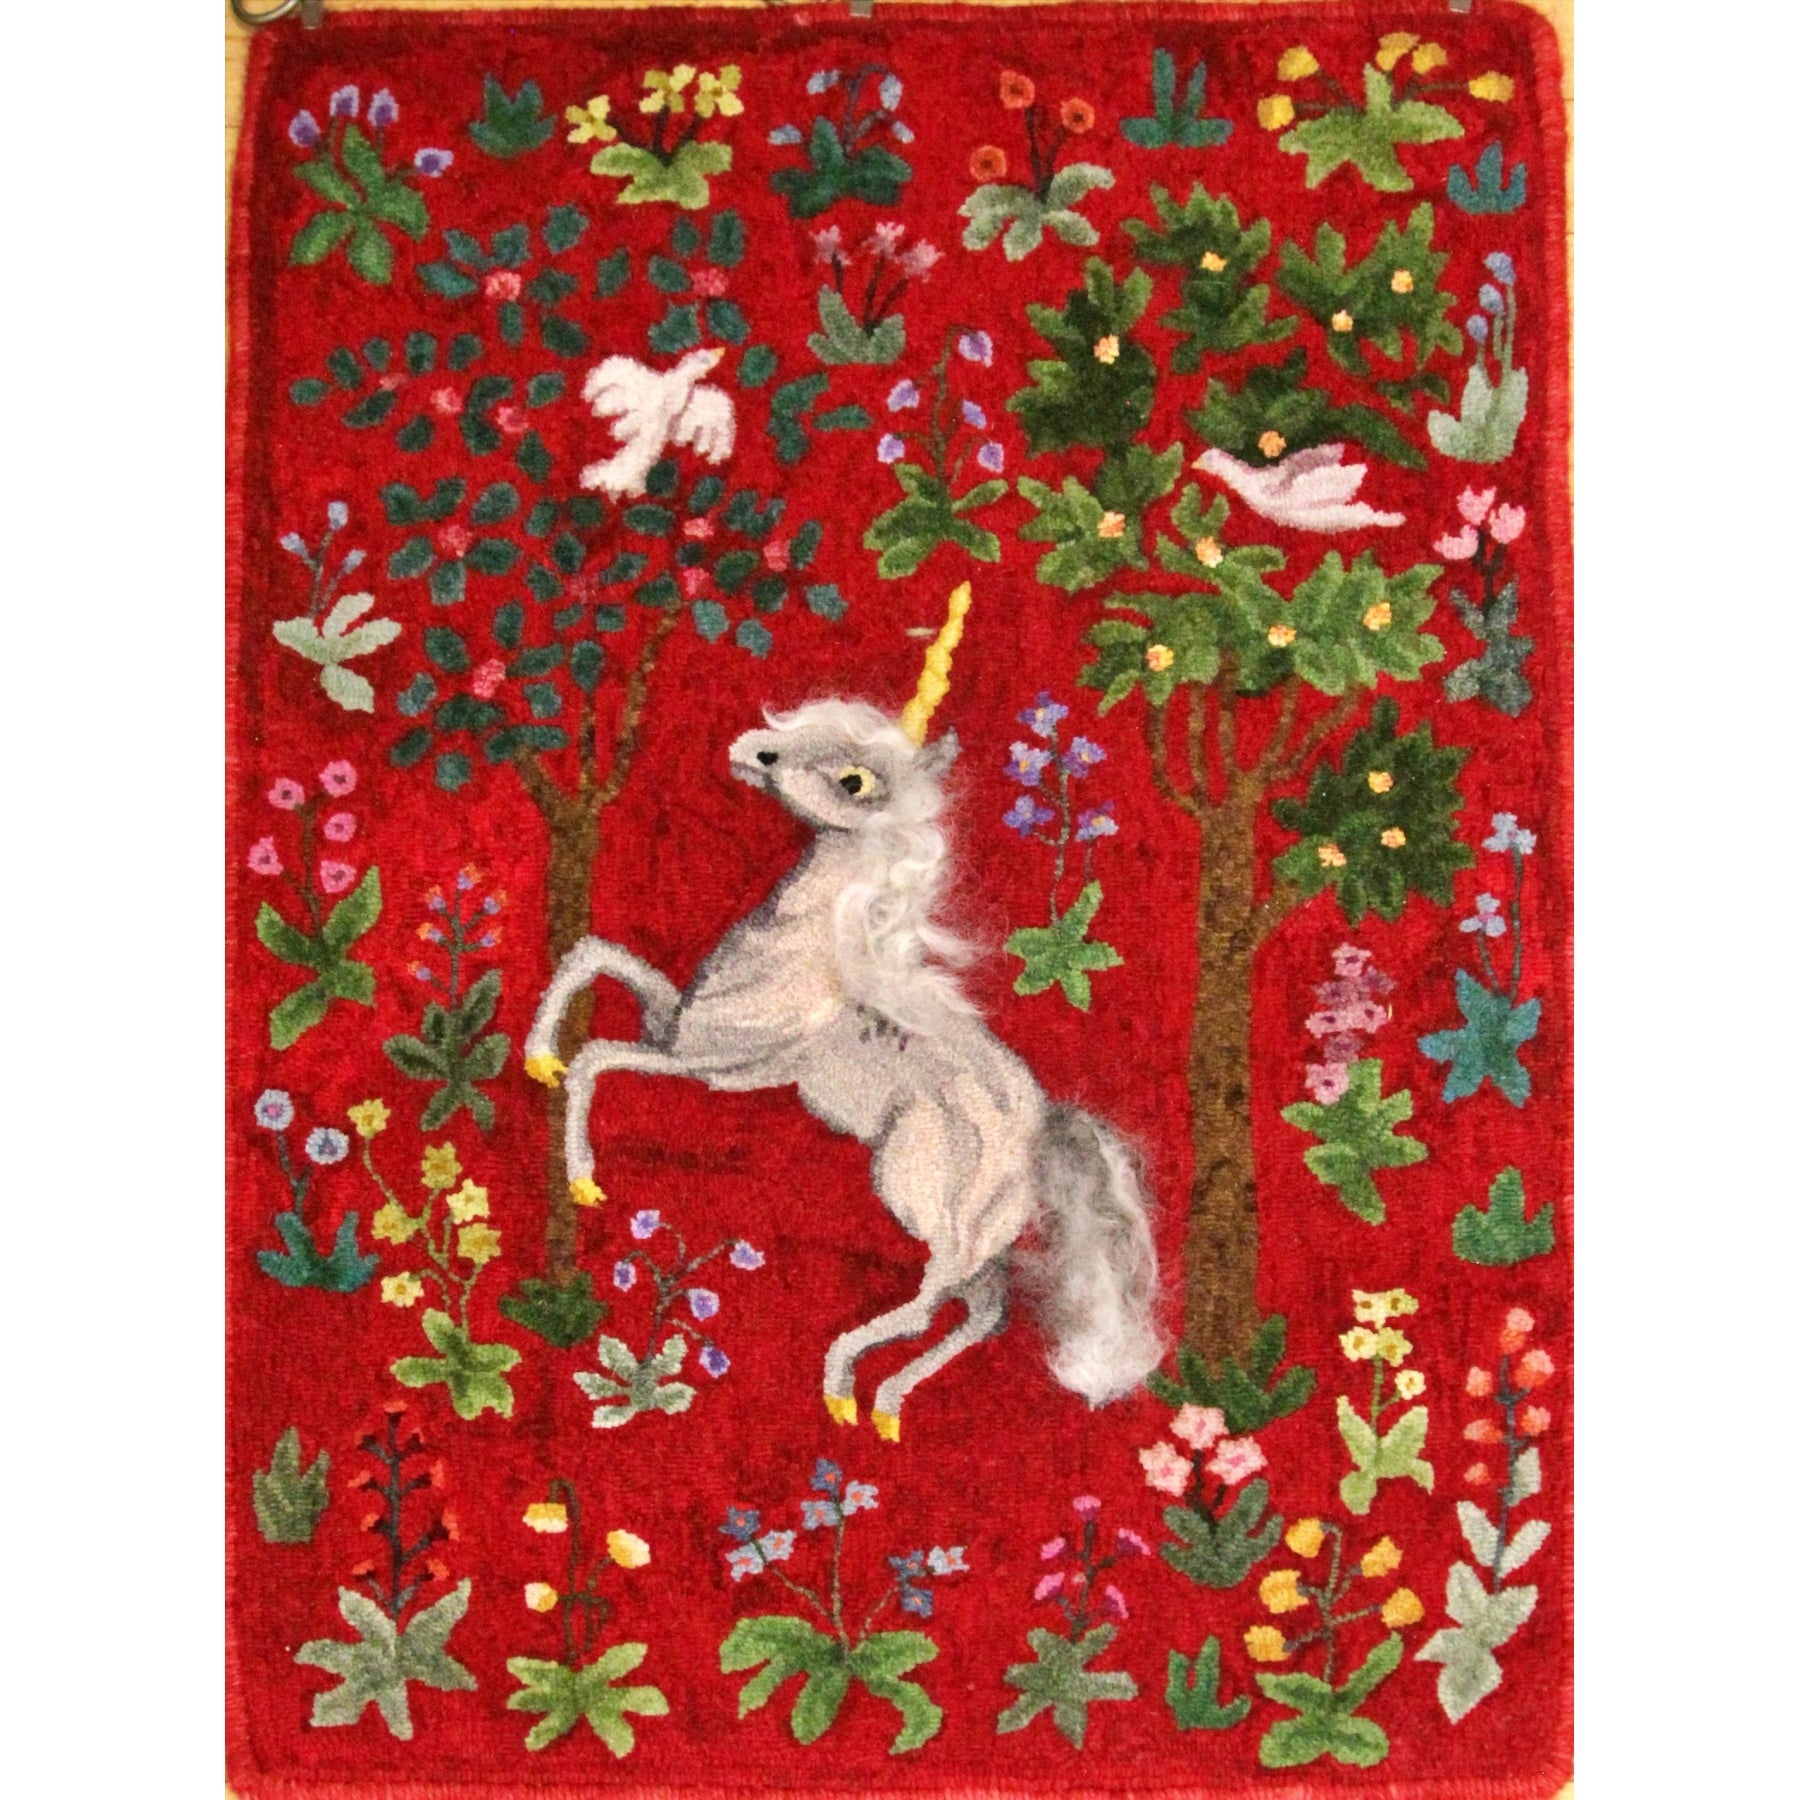 Unicorn Tapestry, rug hooked by Pat Levin